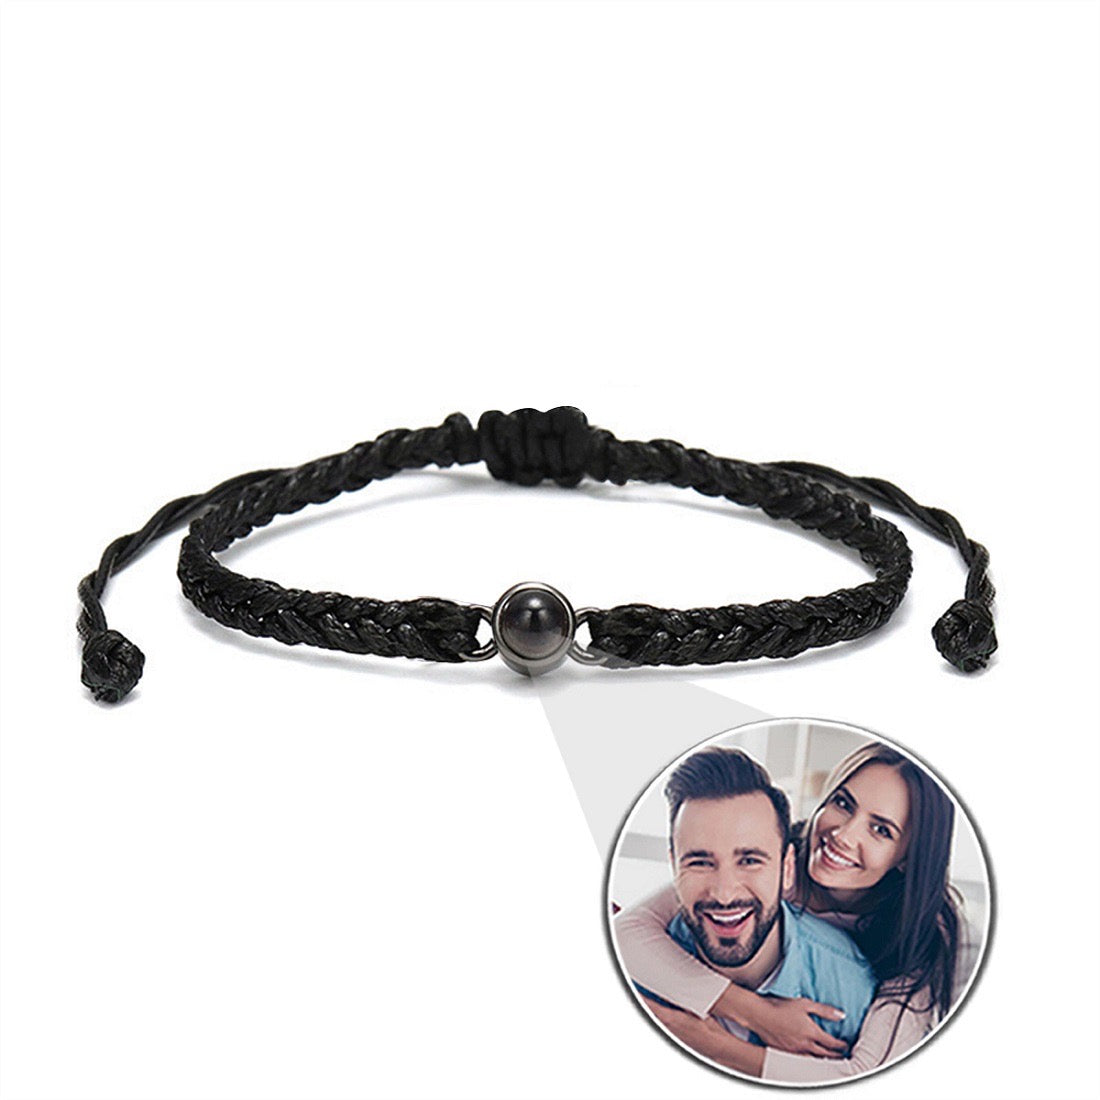 Buy Personalized Photo Projection Bracelet,braided Rope Projection Bracelet,custom  Couple Photo Bracelet,memorial Gift,picture Inside Jewelry Online in India  - Etsy